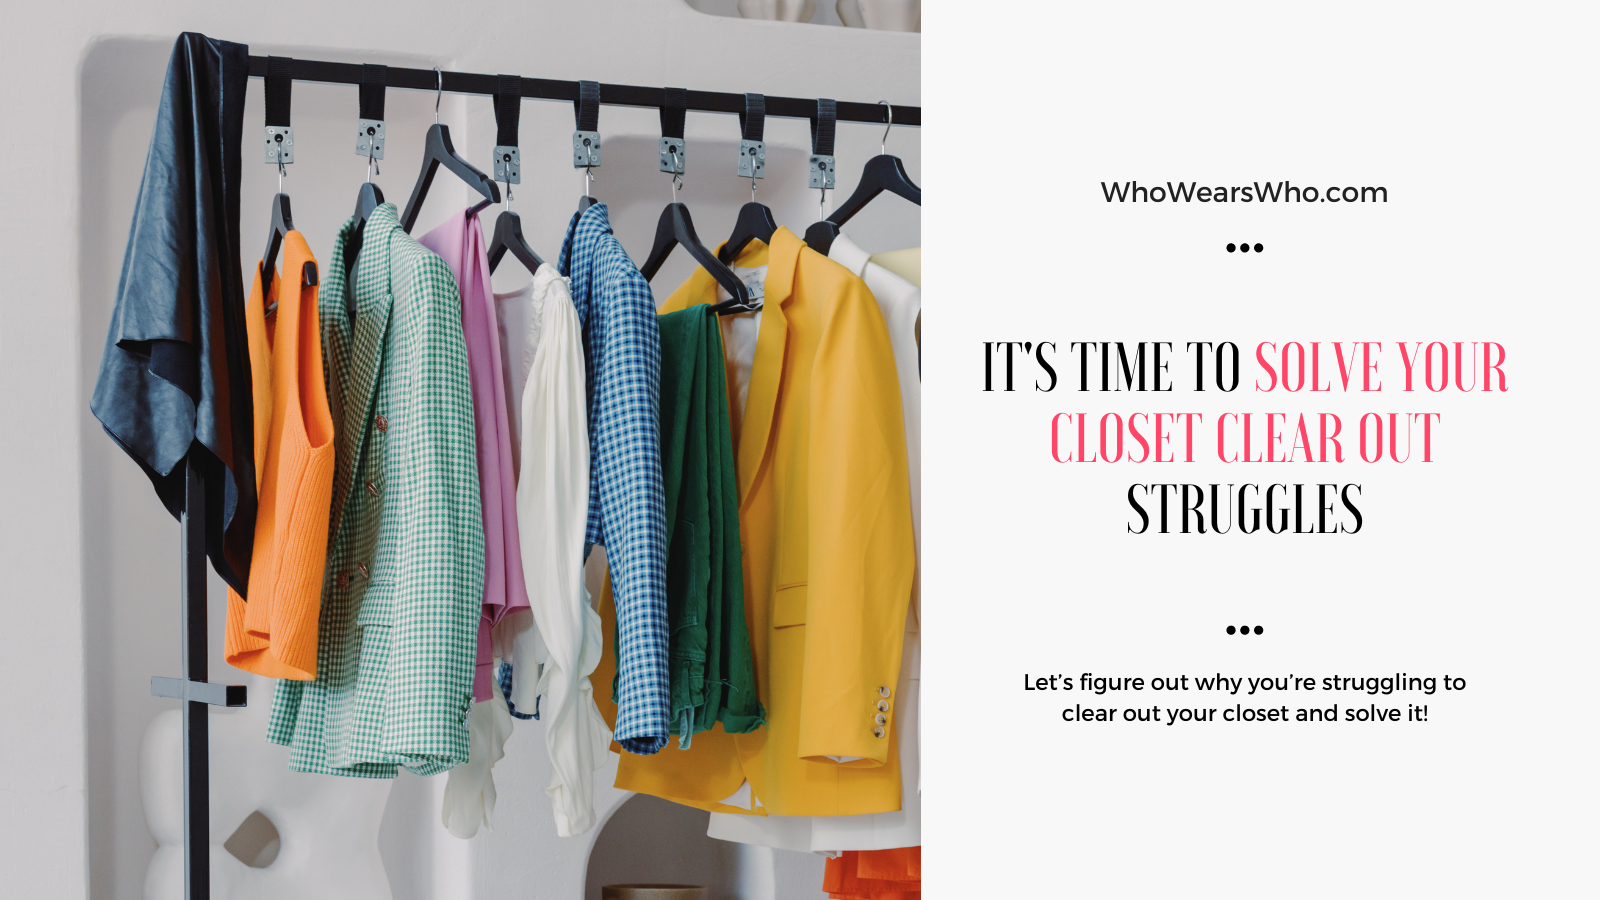 It’s time to solve your closet clear out struggles Twitter